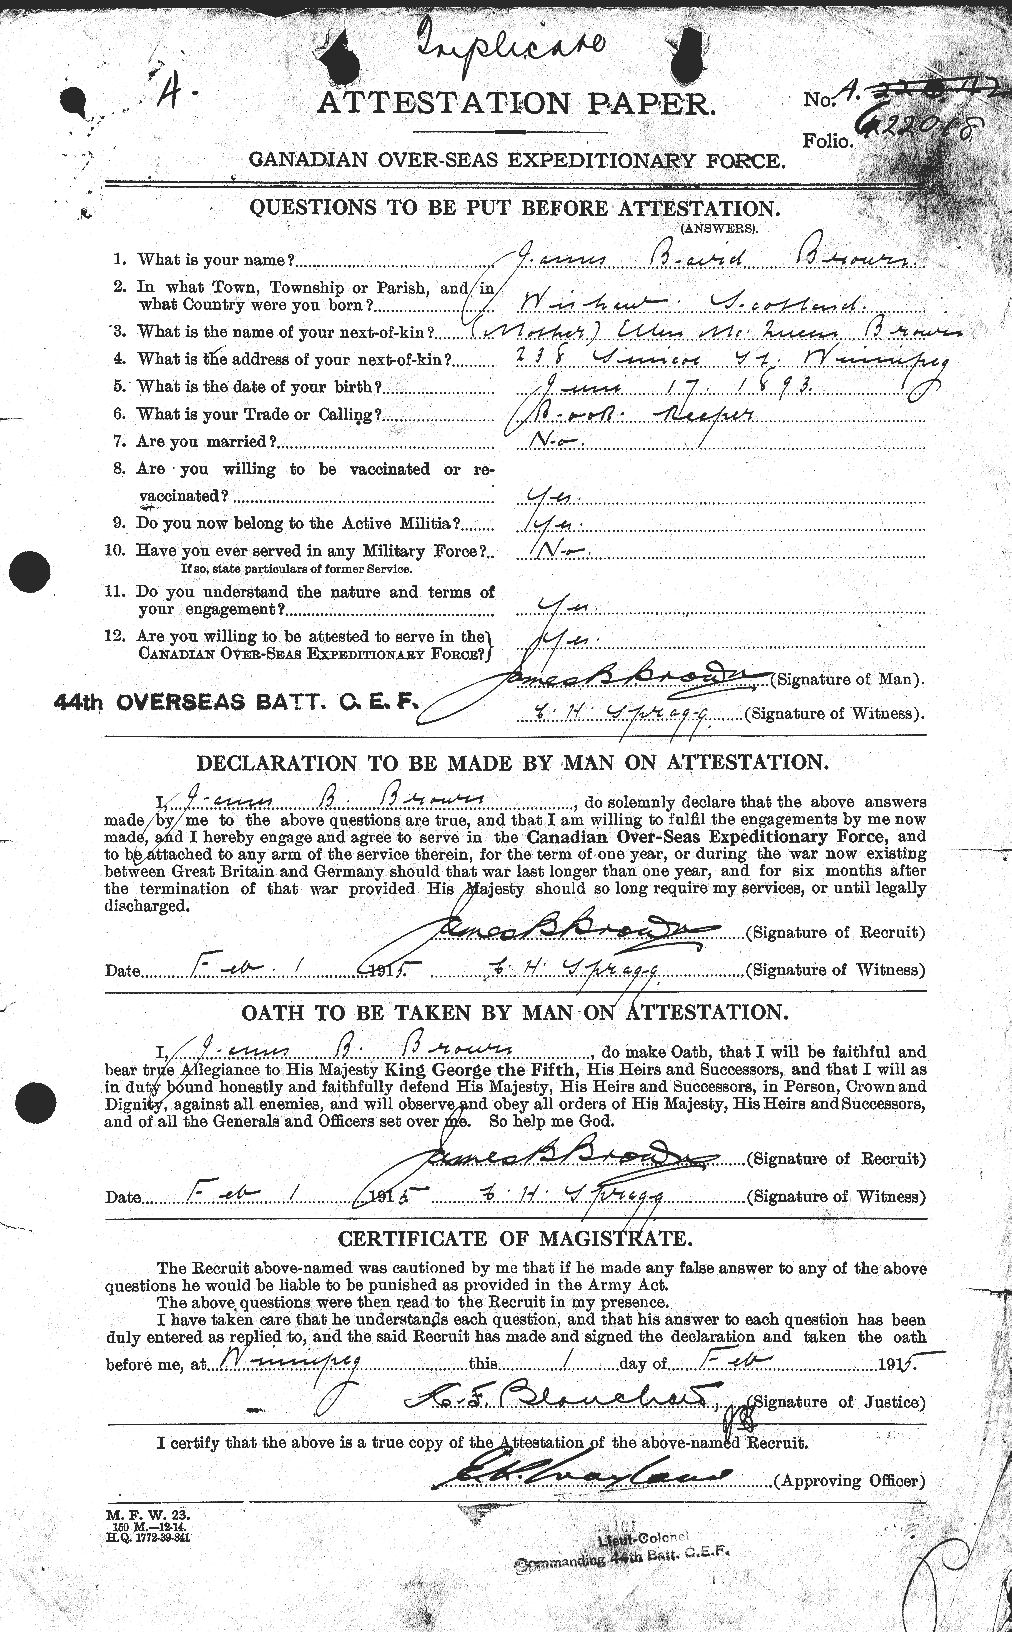 Personnel Records of the First World War - CEF 265797a